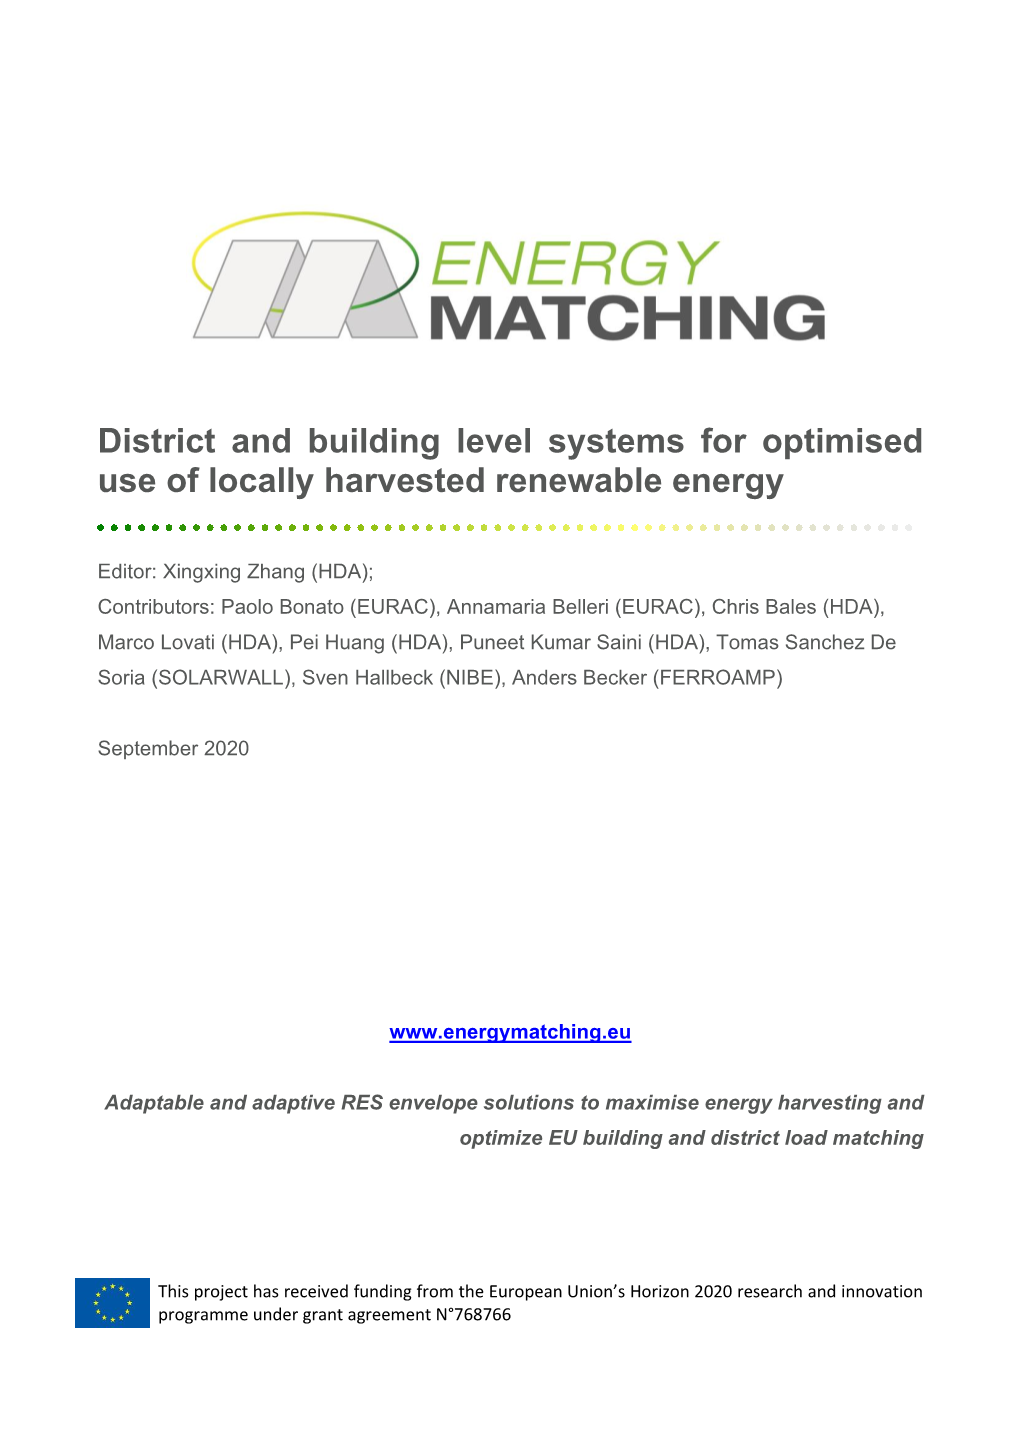 District and Building Level Systems for Optimised Use of Locally Harvested Renewable Energy